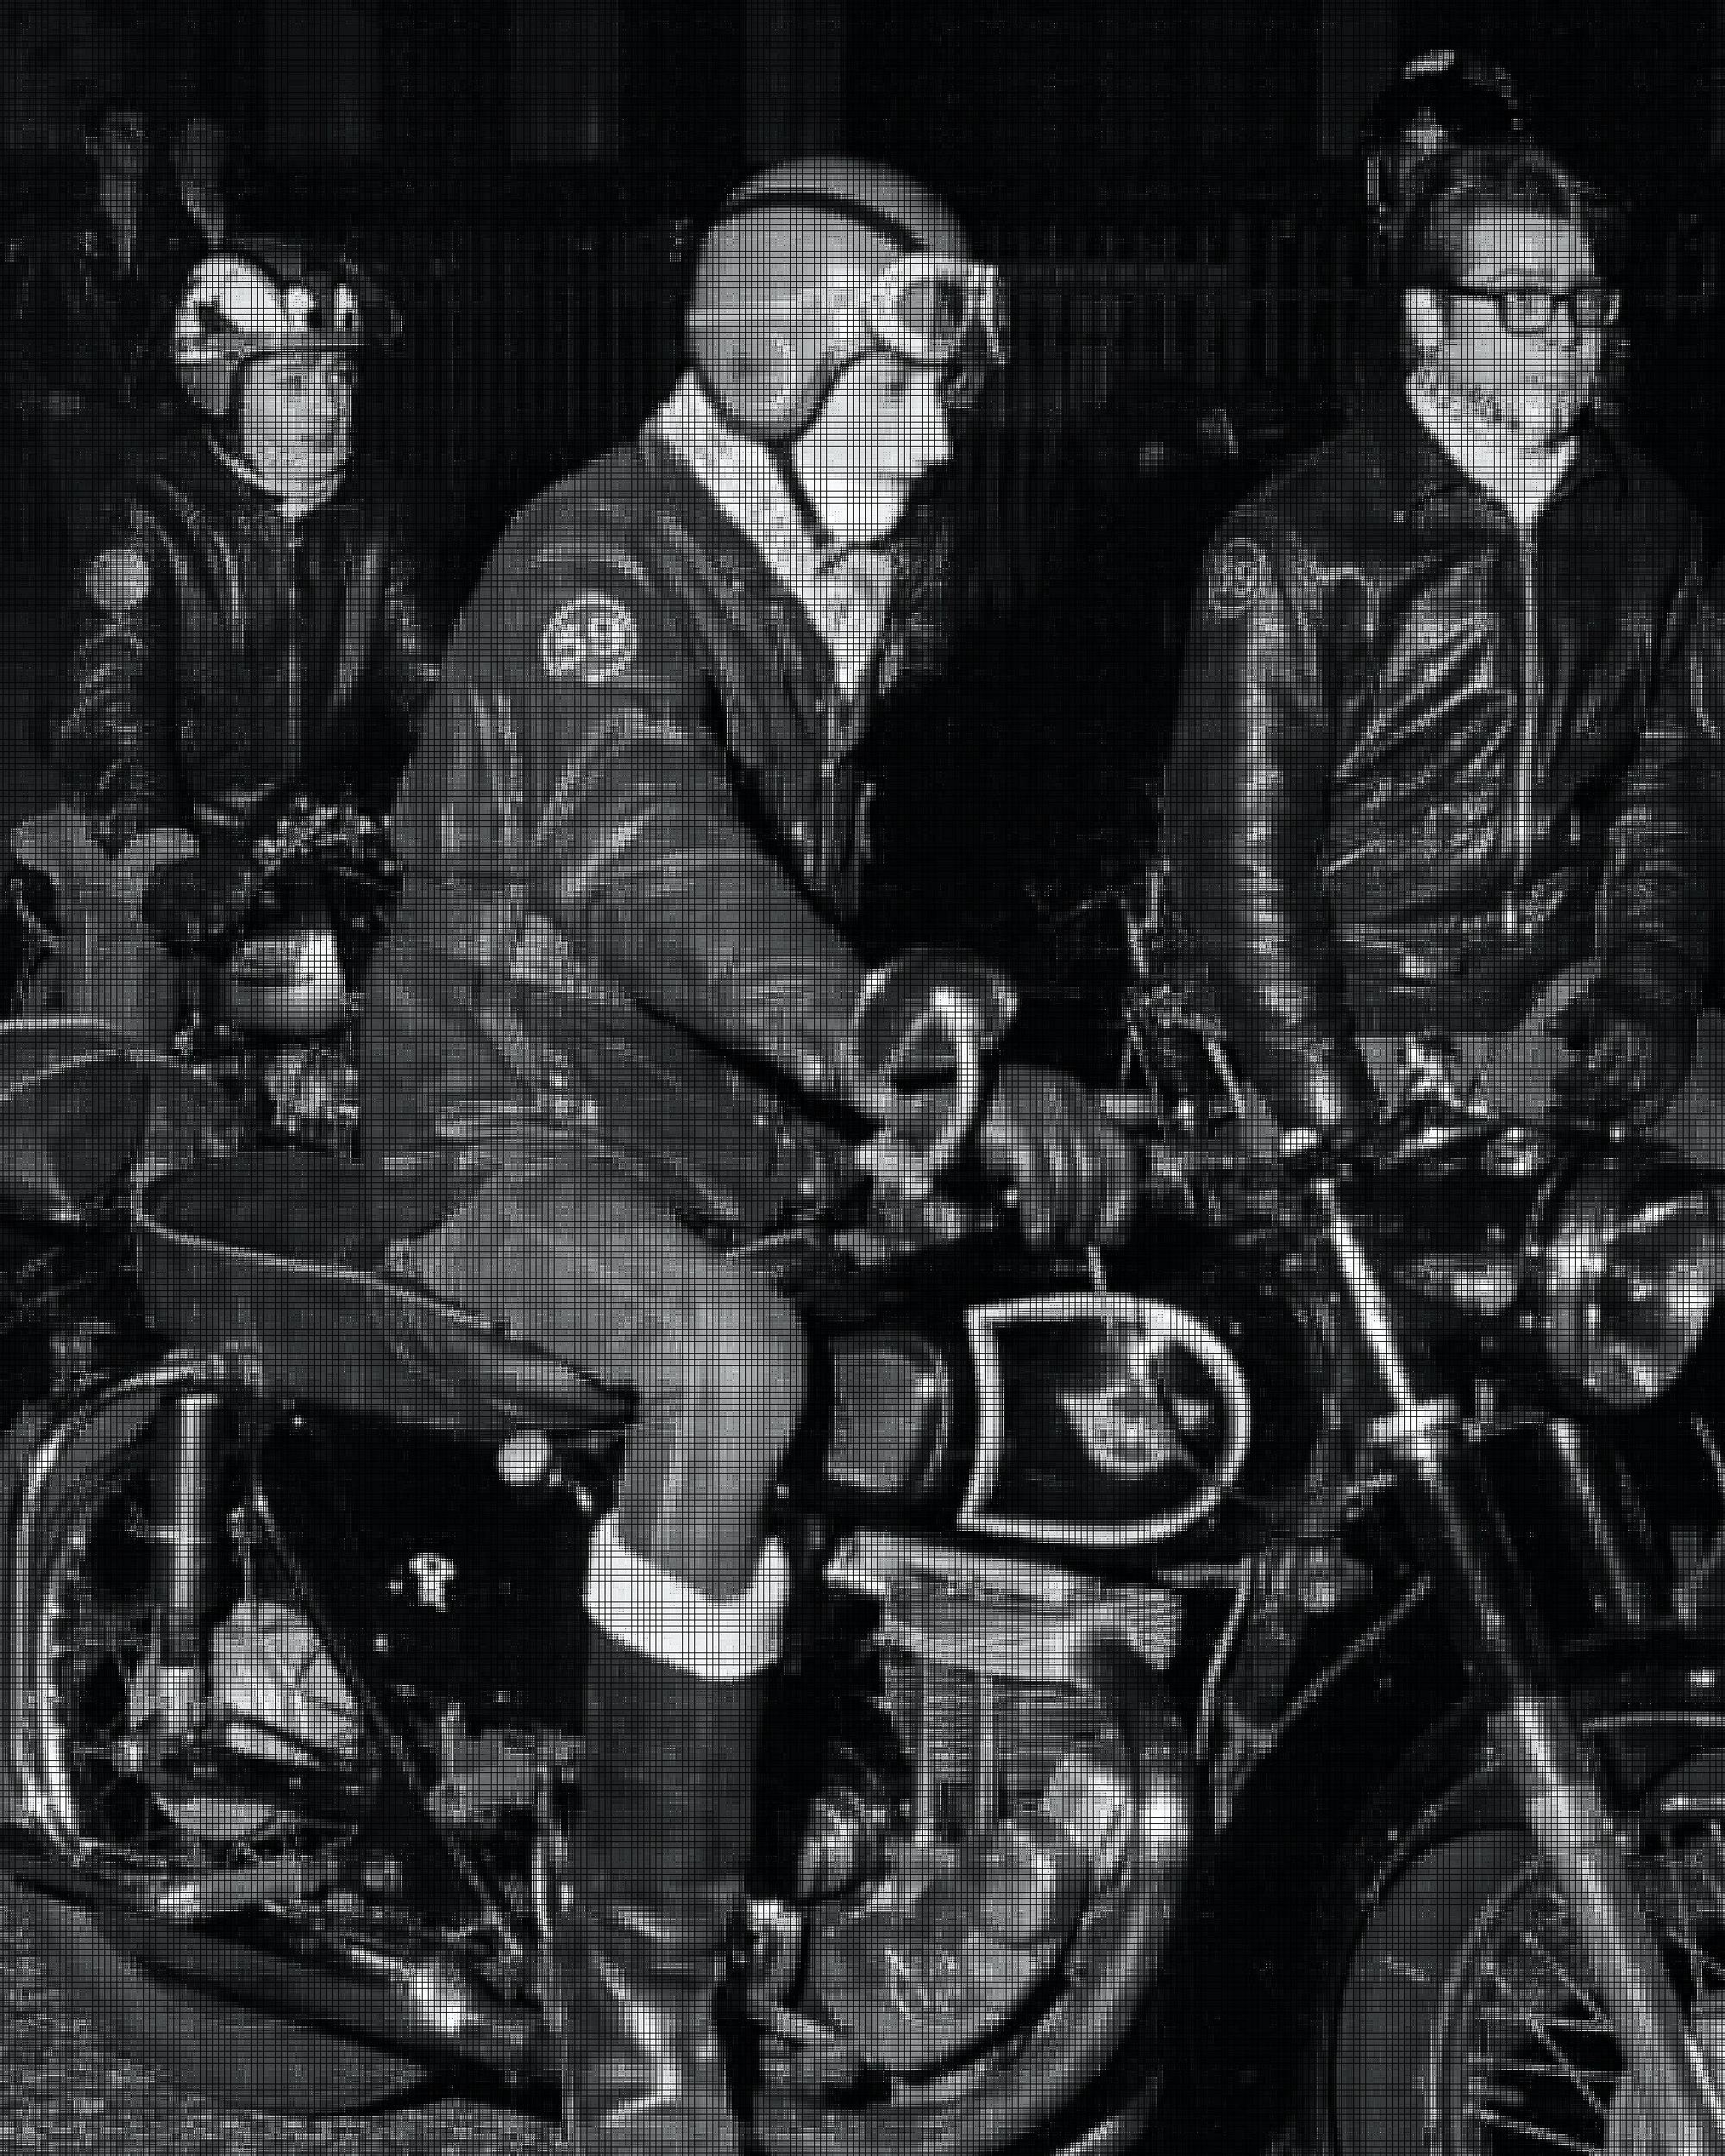 Two photos, the first black and white with three men on motorcycles and the second shows a group of people sitting outside on the ground wearing Levi's